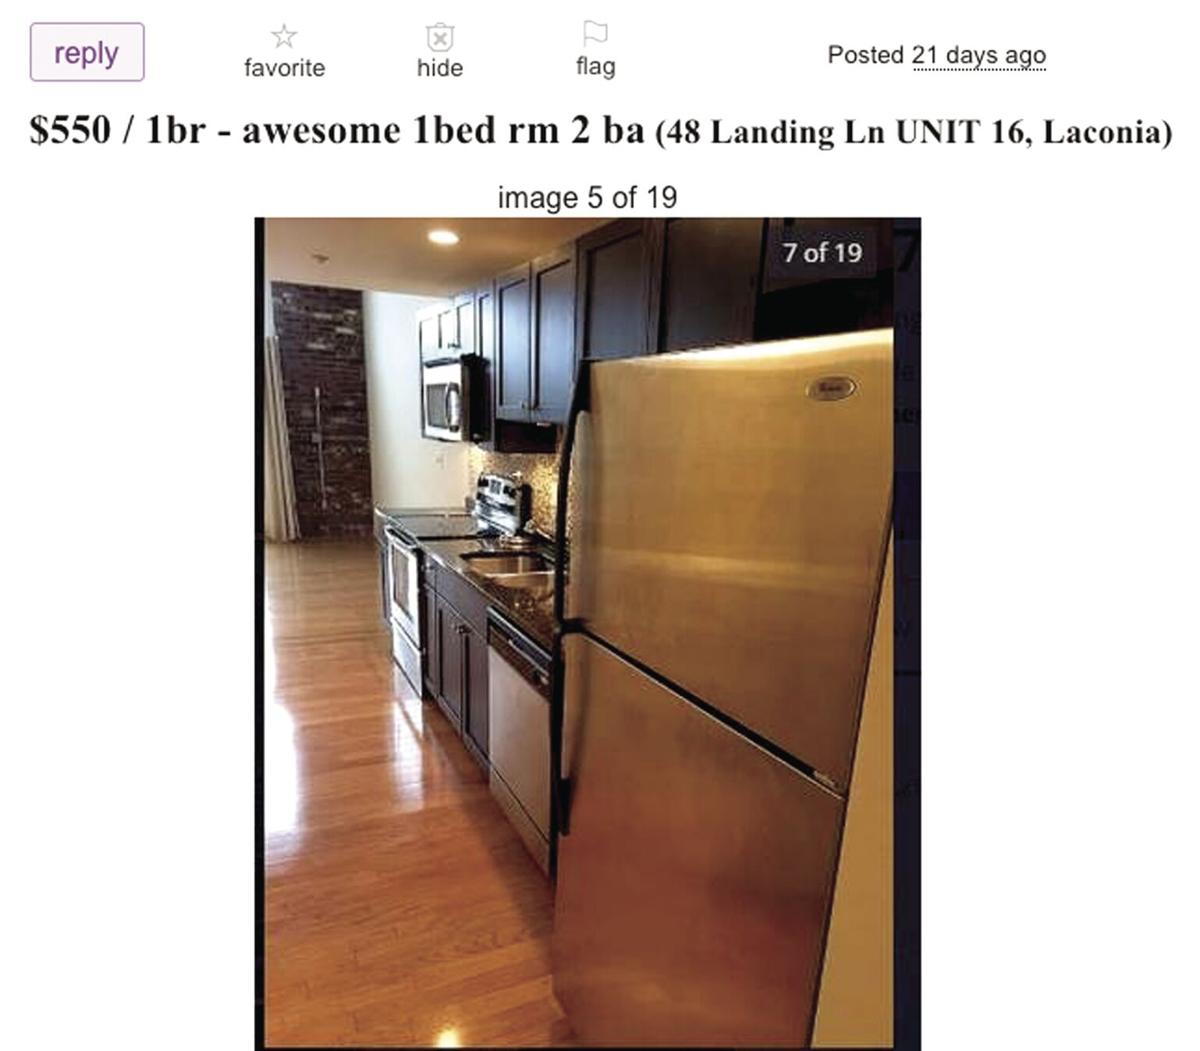 Such a deal — too bad it's not for real: Craigslist rental scam